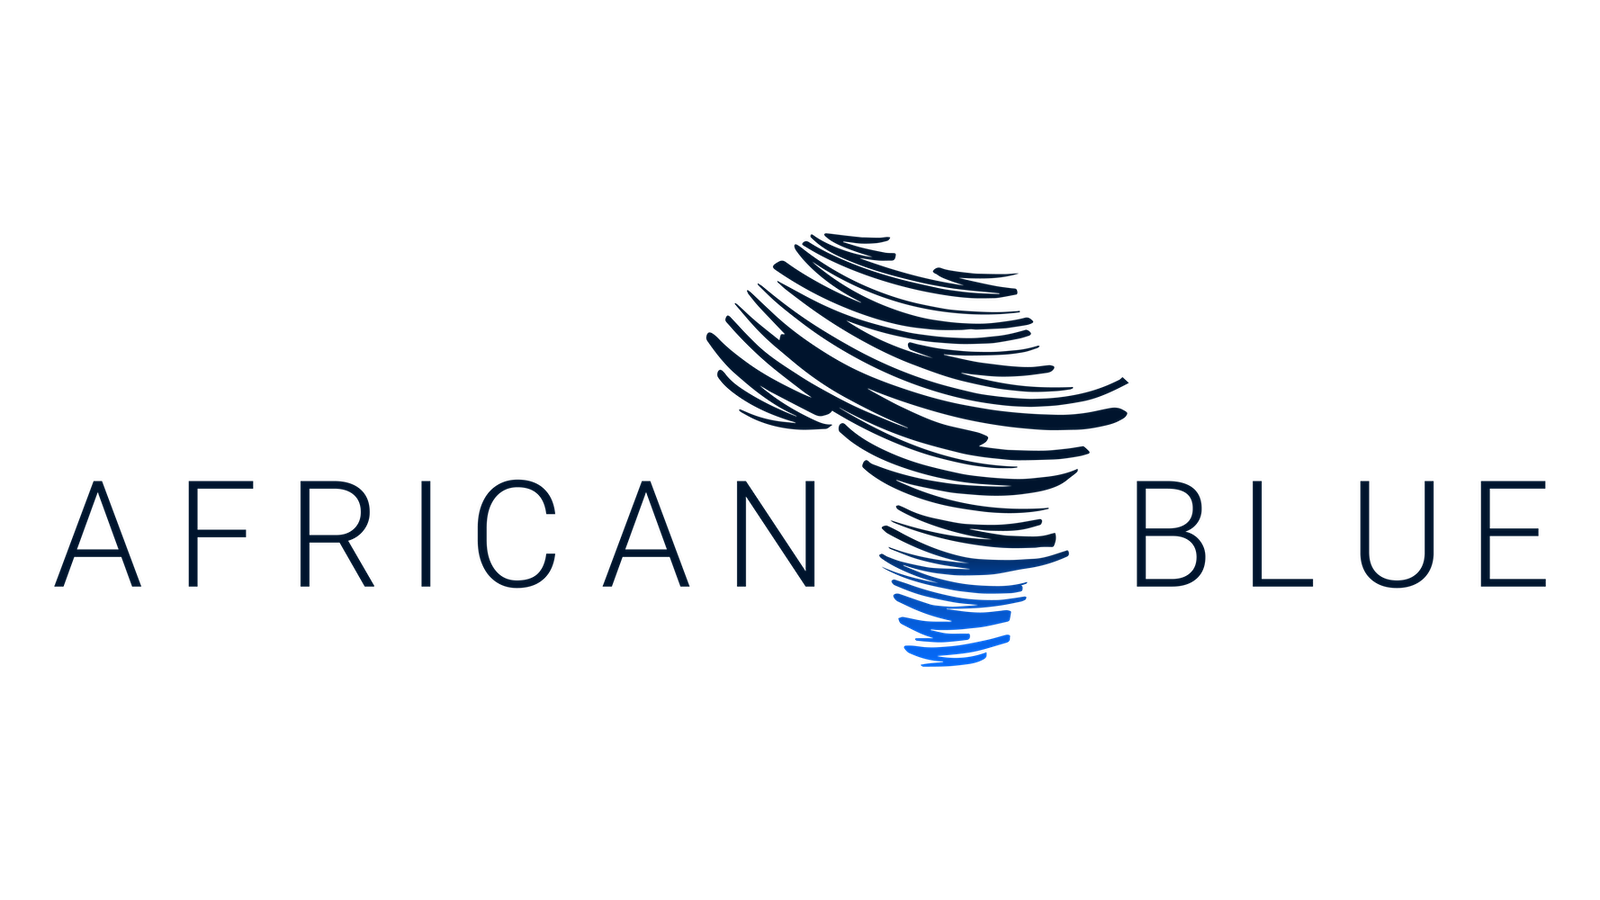 South African Tours and Safaris – African Blue Tours Logo